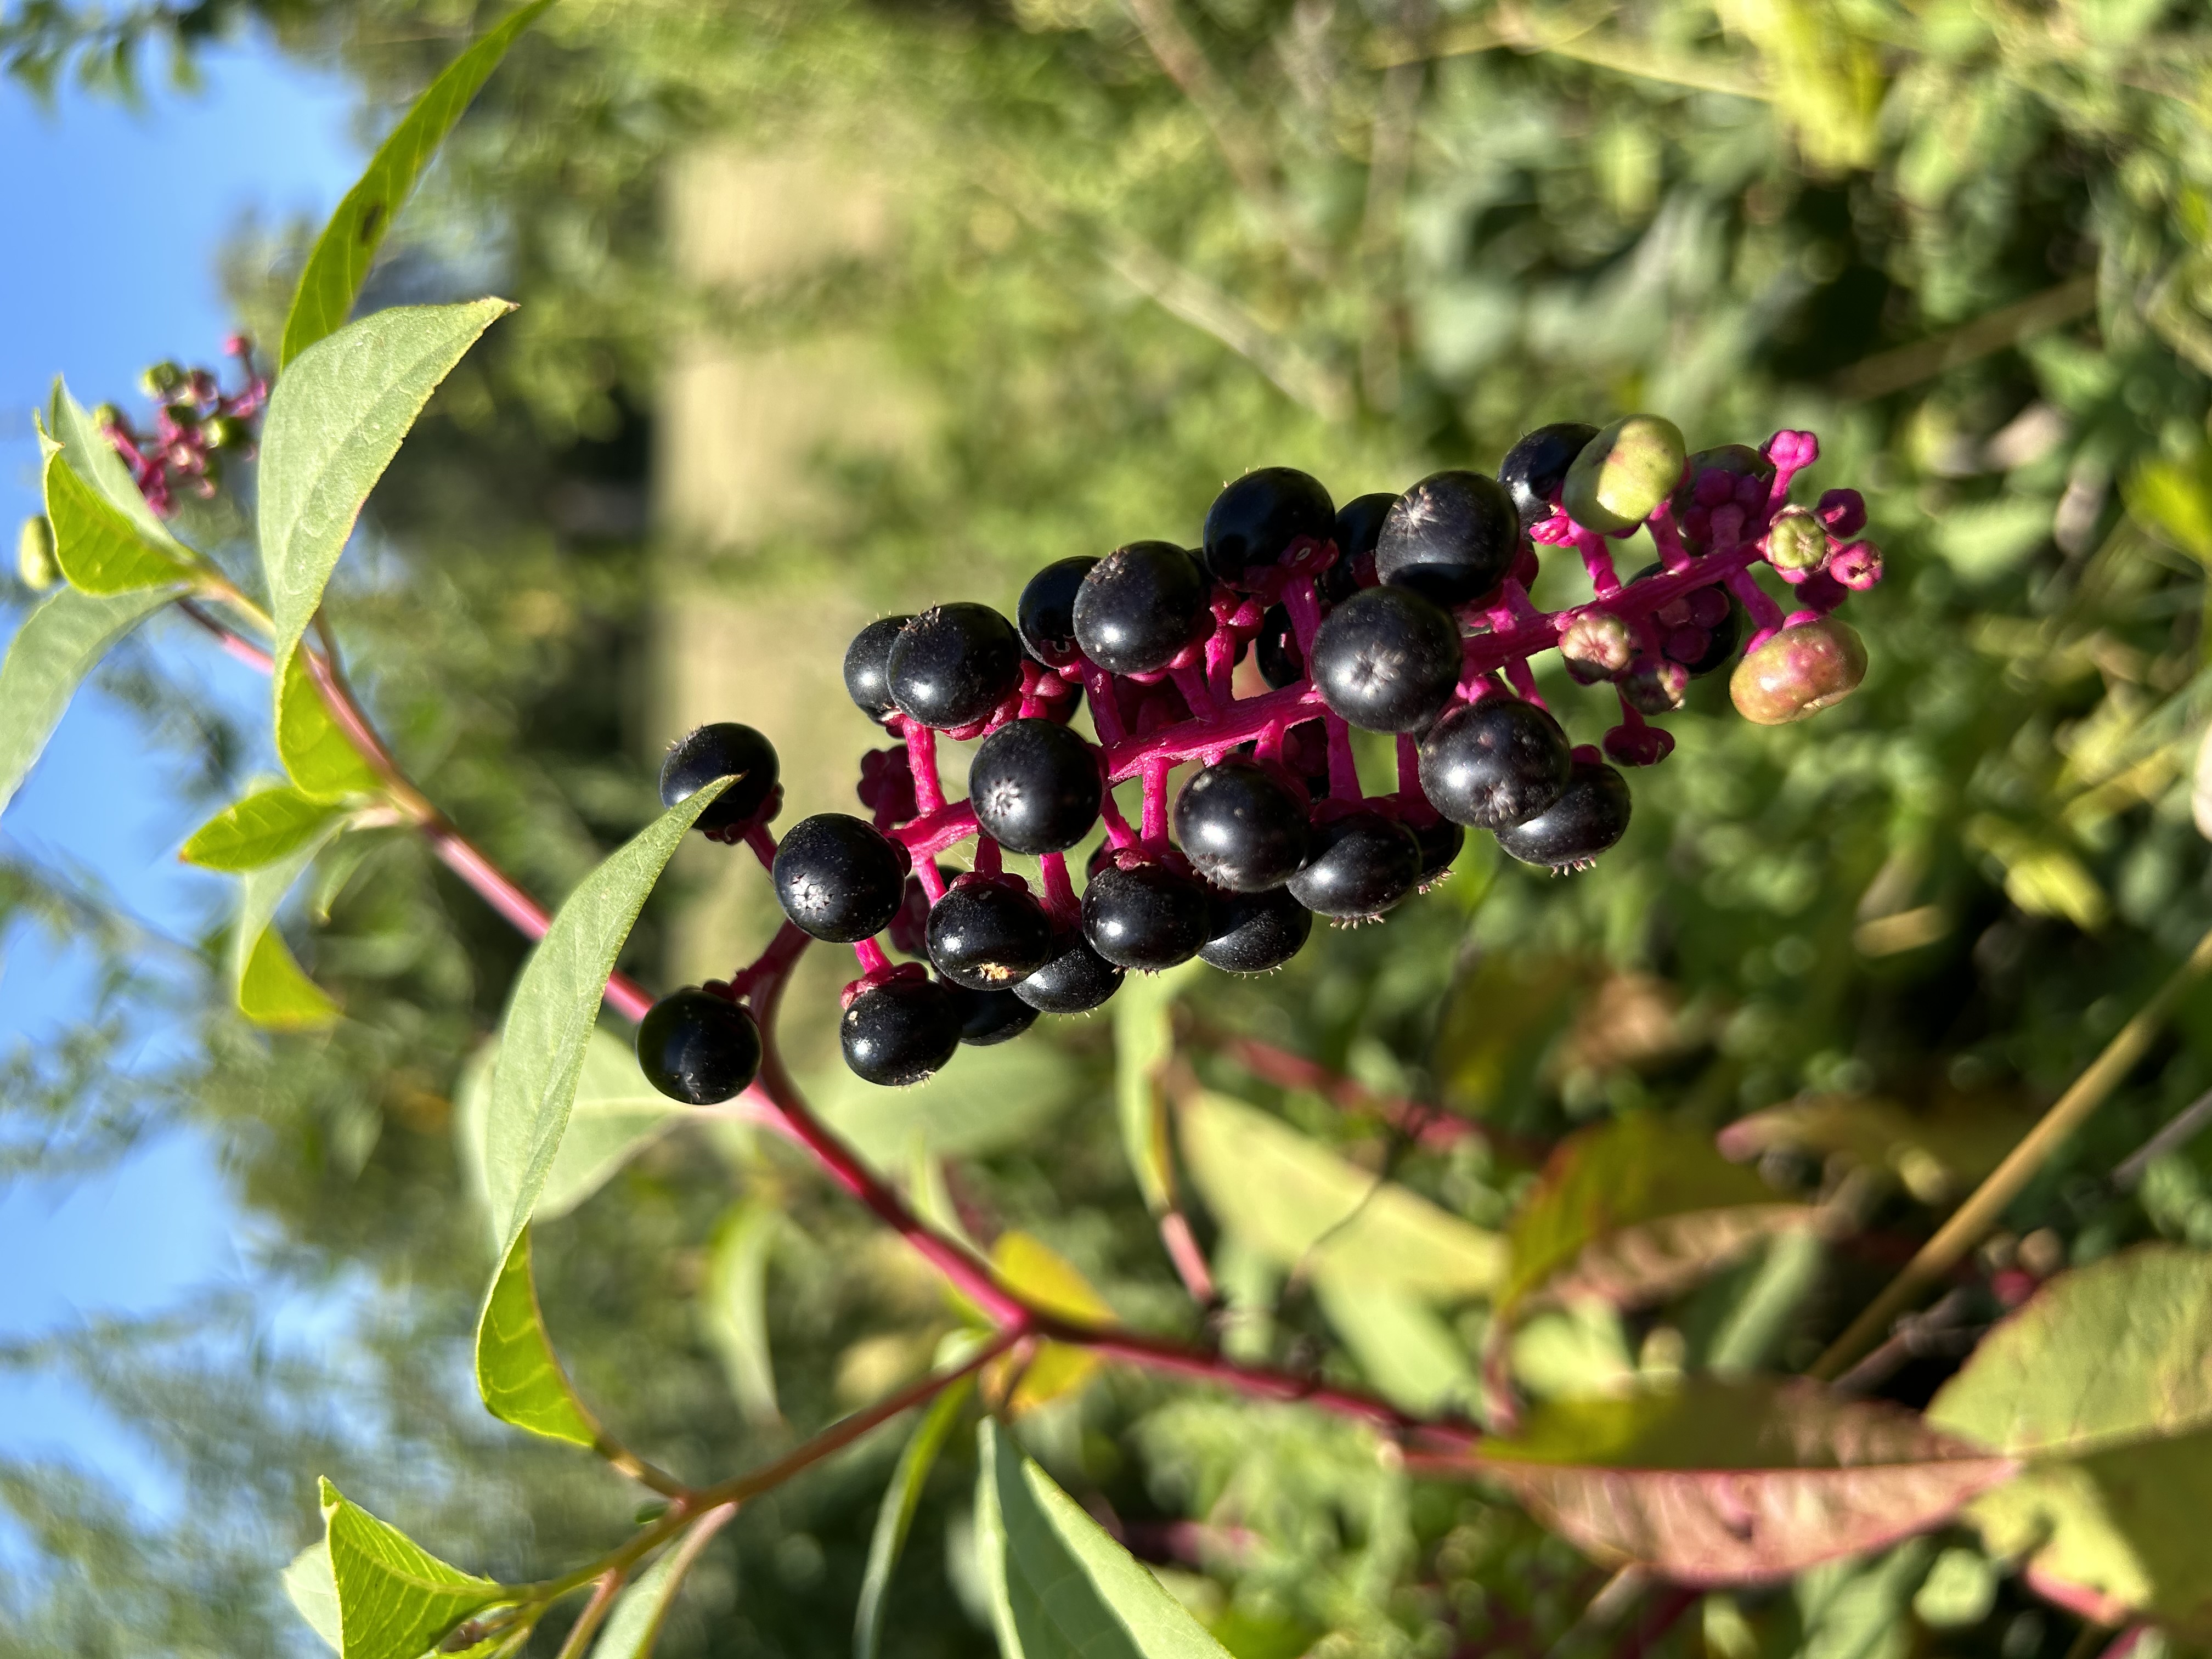 Dark purple berries of pokeweed hang in an inviting drupe from a plant in the ditch next to Owl Acres.